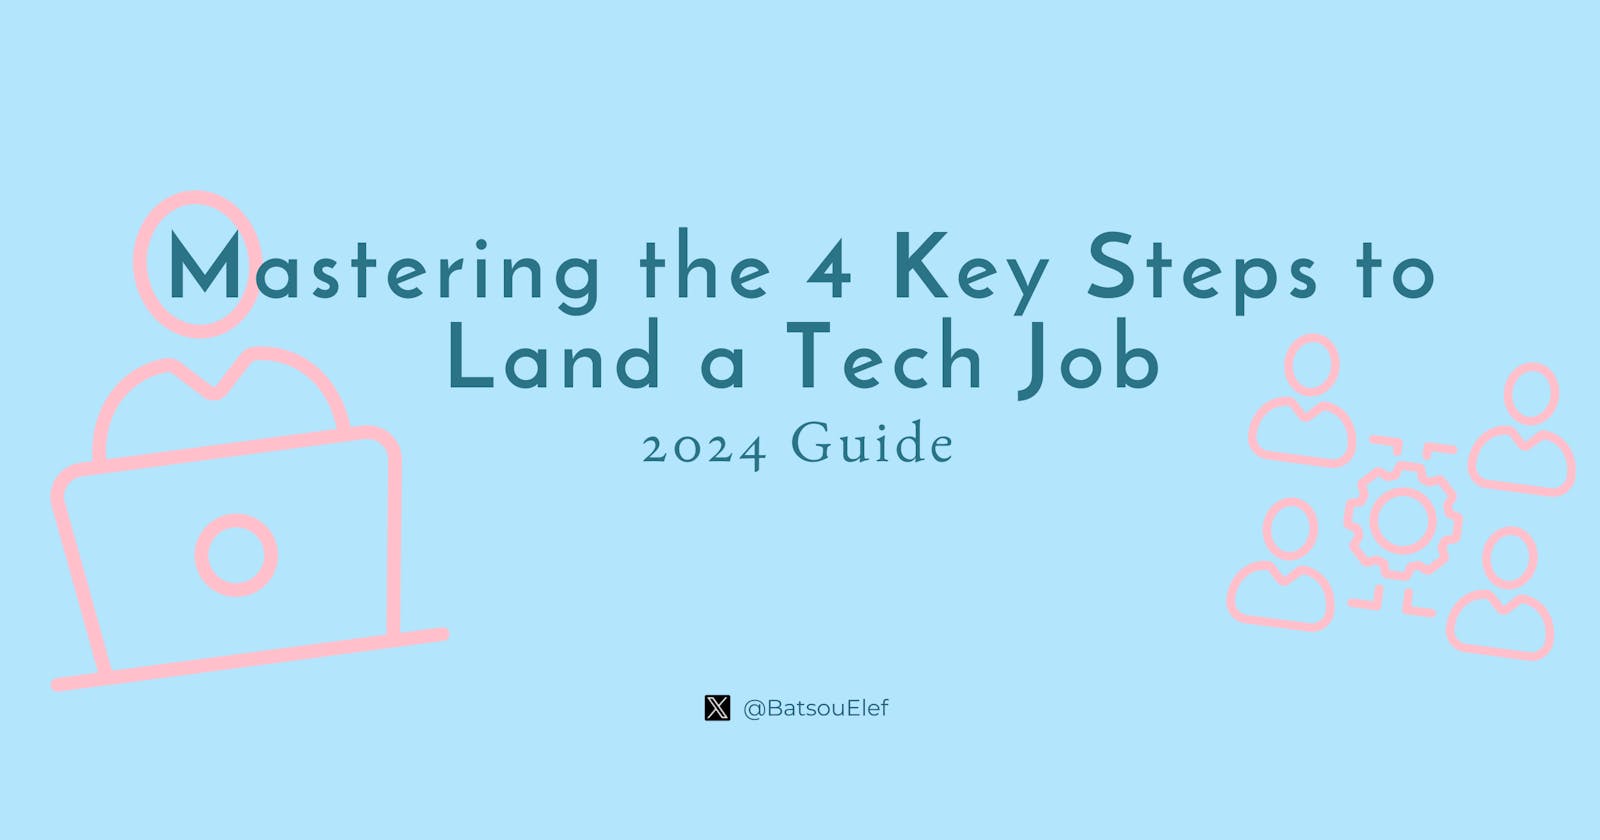 2024 Guide: Mastering the 4 Key Steps to Land a Tech Job